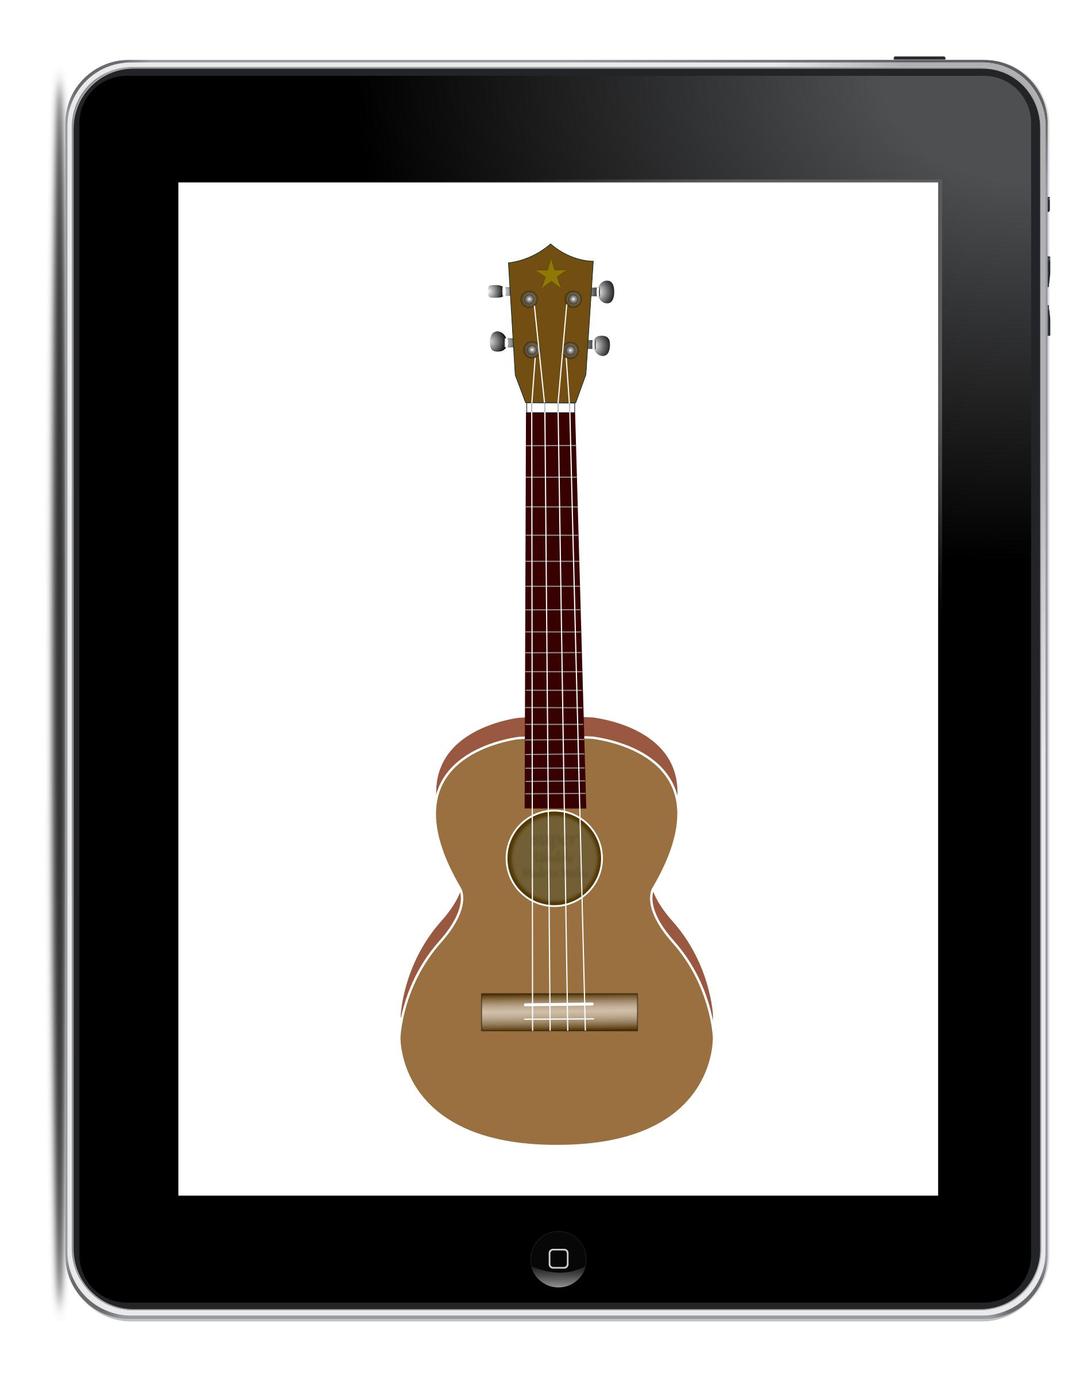 Play with Openclipart on your iPad with Inkpad png transparent